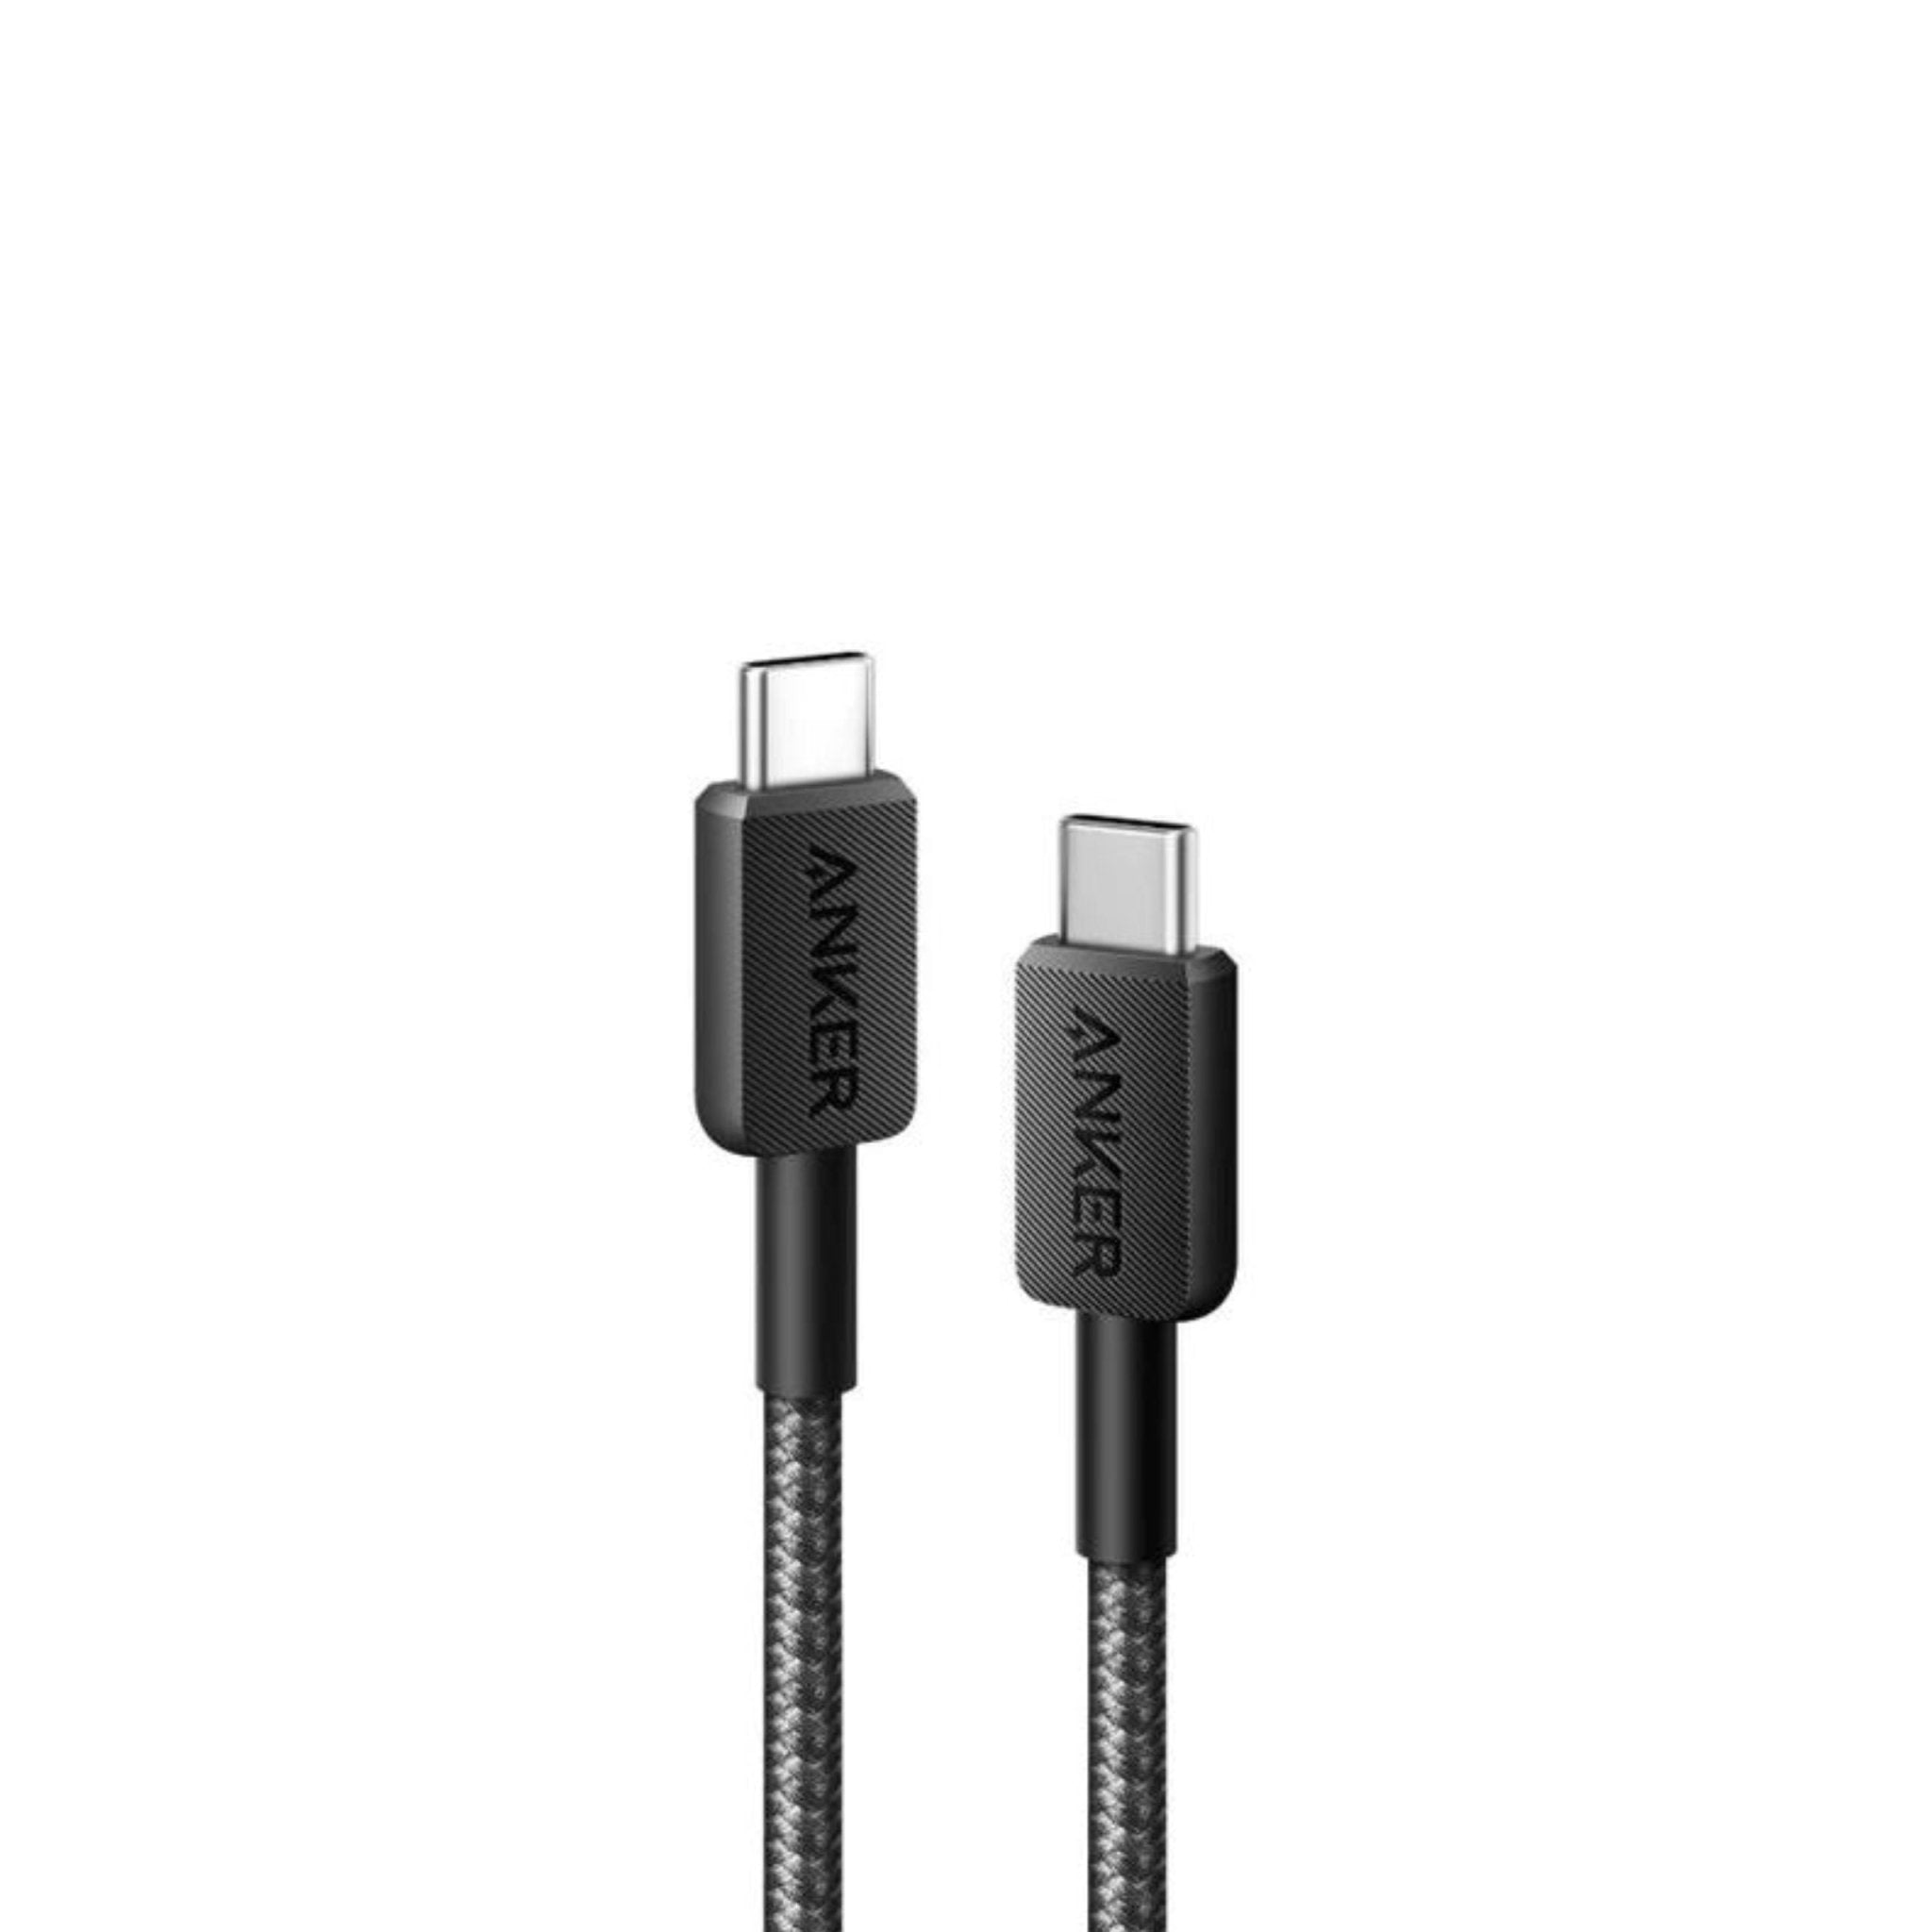 Anker 322 USB-C to USB-C Cable Braided 3ft(0.9m) - Black